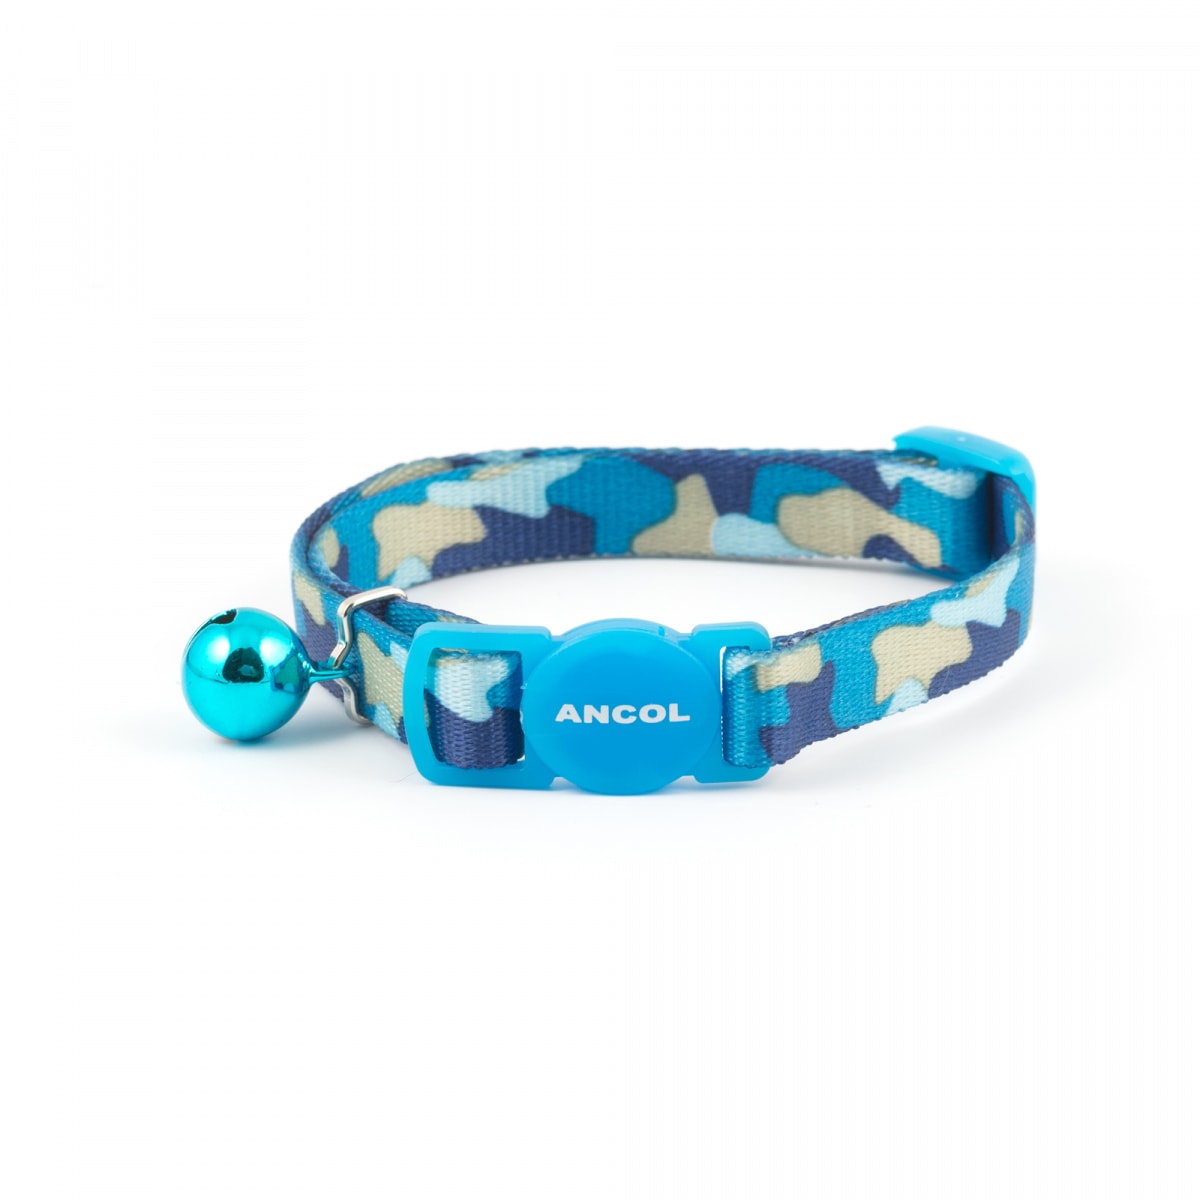 Ancol Cat Collar - Camouflage Blue Main Image